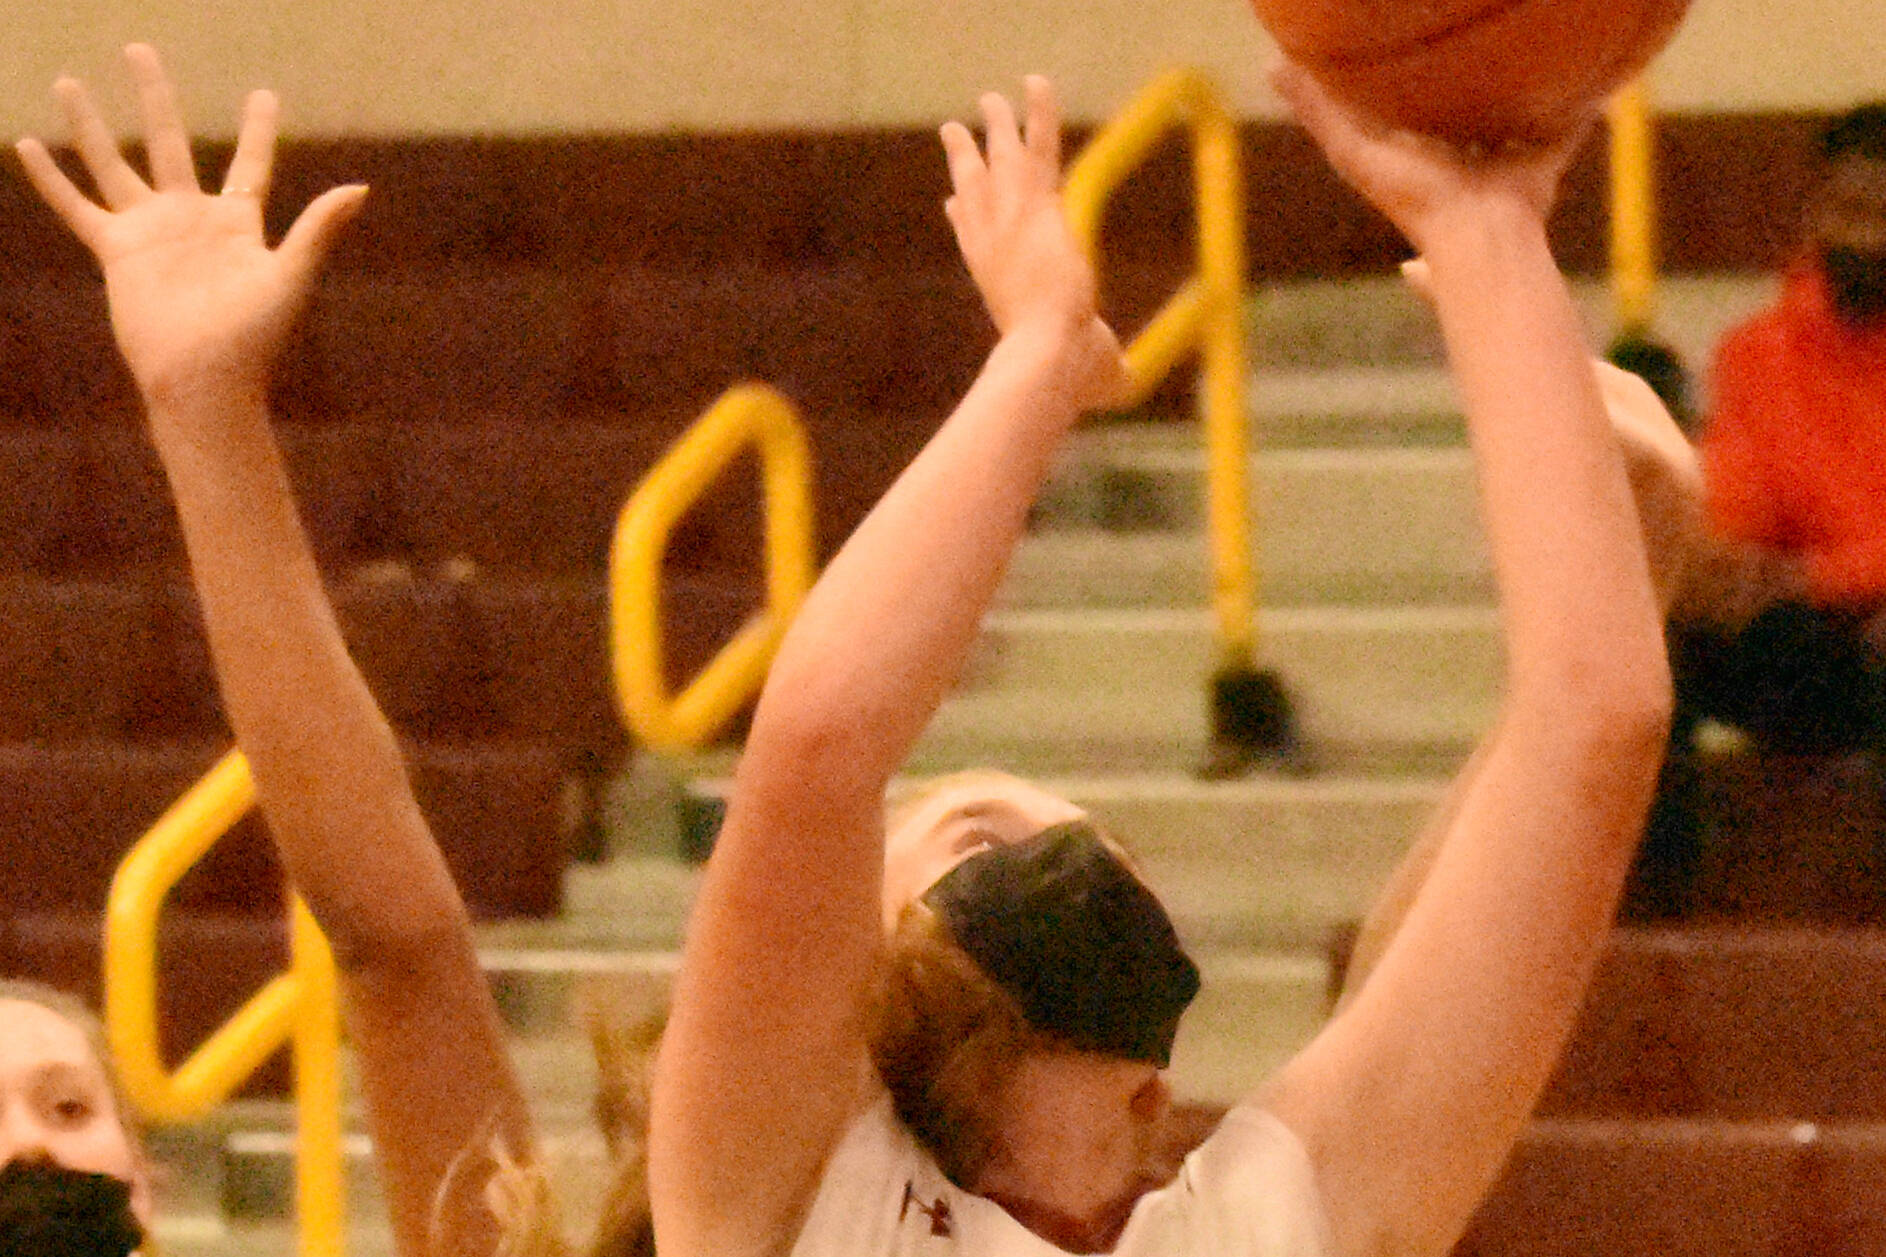 FILE PHOTO BY KEVIN HANSON 
One of the Plateau’s top returning players is Enumclaw High senior Rosie Penke who earned first team all-league honors a season ago. Here, she goes up for two points during a game last season.